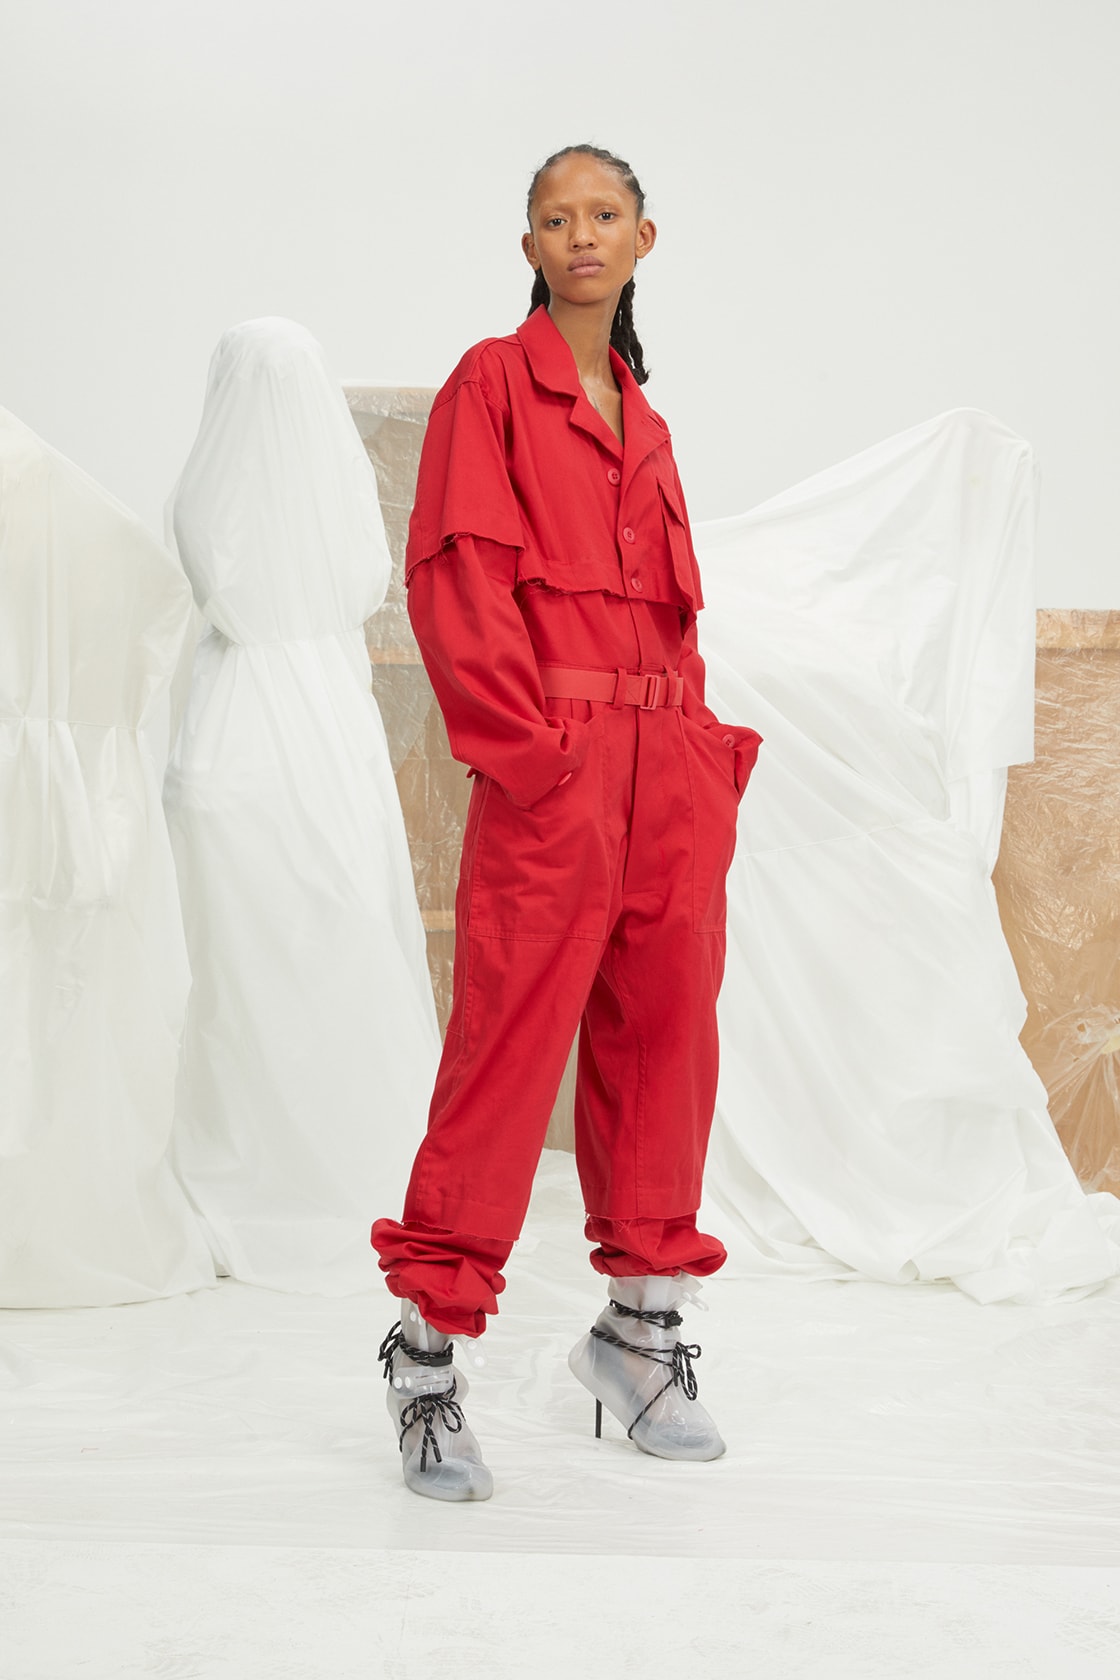 perfect number woman on pedastal Adesuwa Aighewi red flightsuit